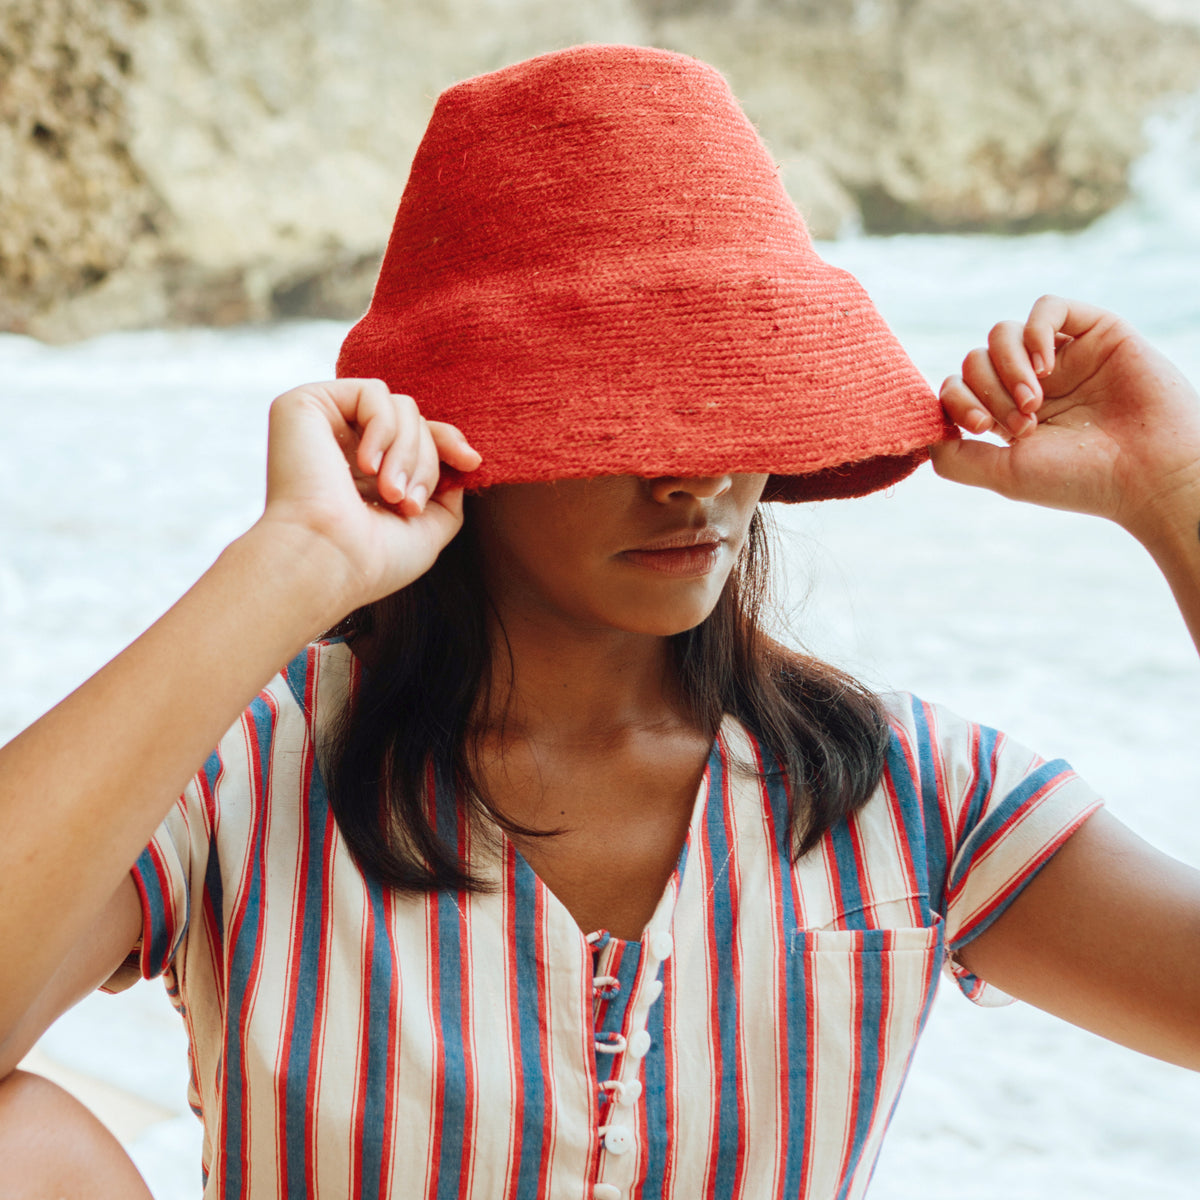 Naomi Jute Bucket Hat in red is designed specifically for the wild at heart with classic sophistication. Enjoy lounging poolside or exploring the city on sun-soaked days as its protective hat brim provides ample shade. Made of natural jute straws which have the perfect weight, this hat will sit comfortably and won't fly away in sudden gusts. It's also very practical to pack in any size luggages and ideal to take on any trips.